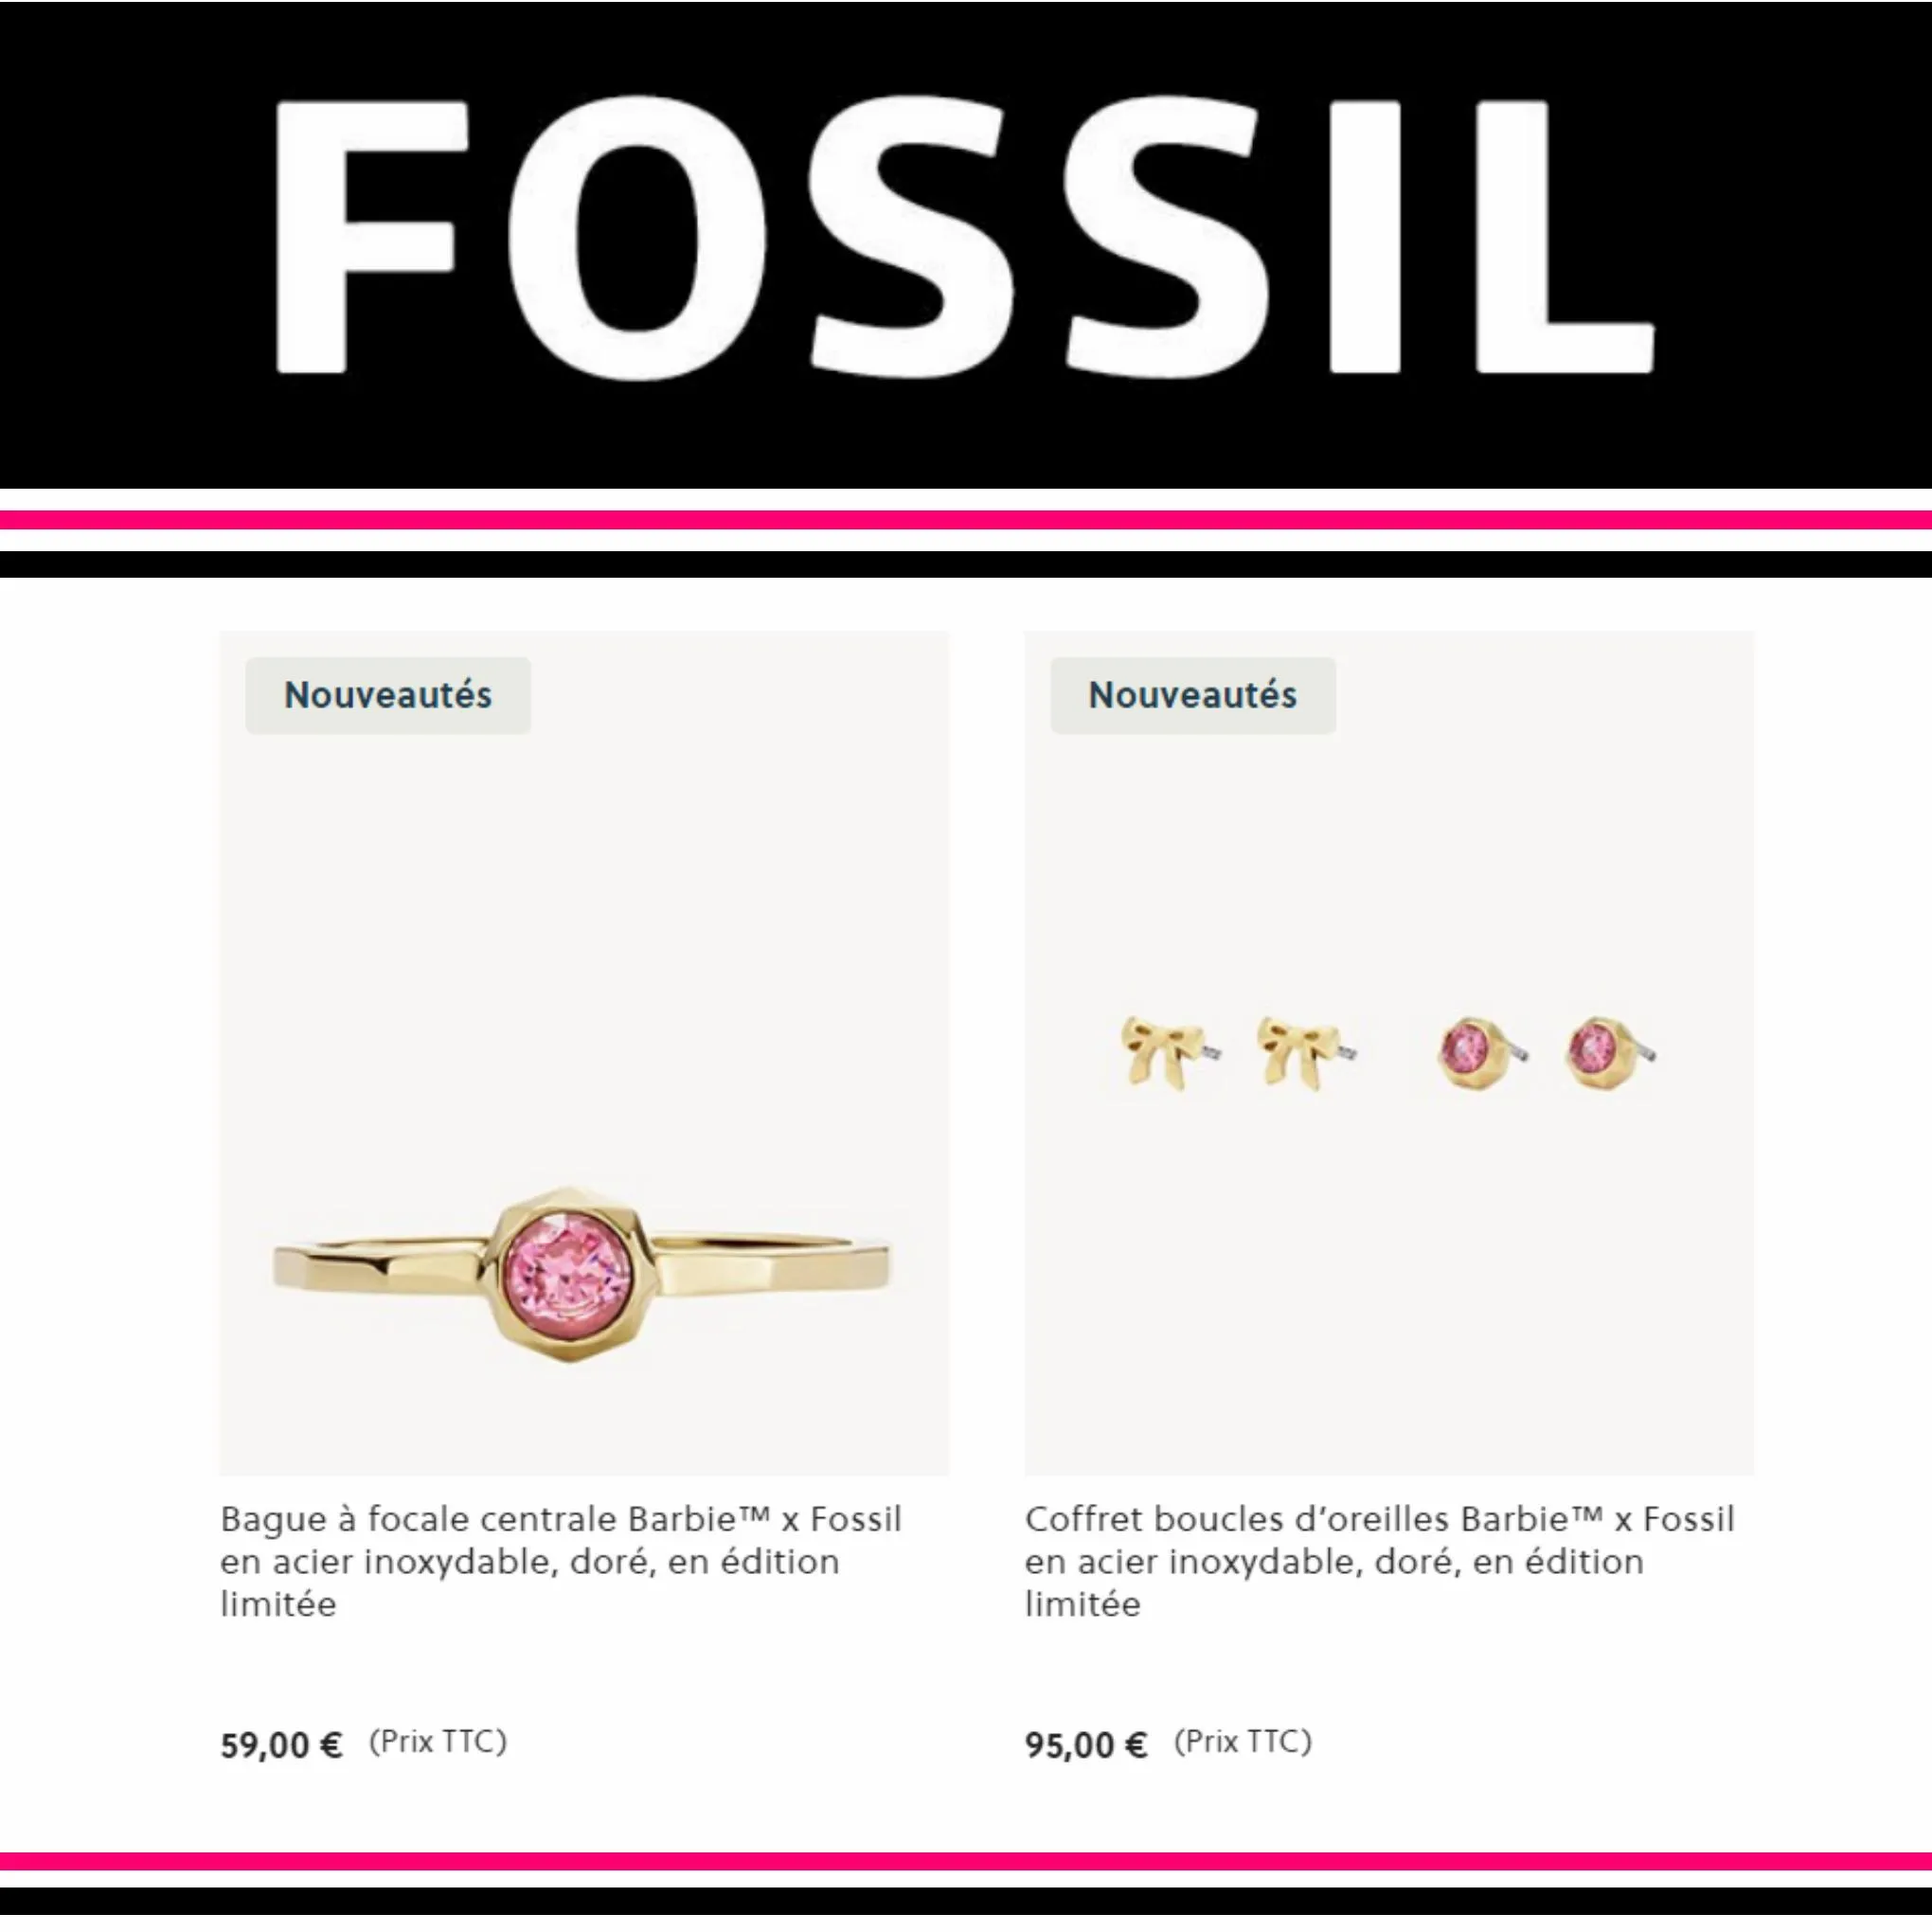 Catalogue Barbie x Fossil, page 00004